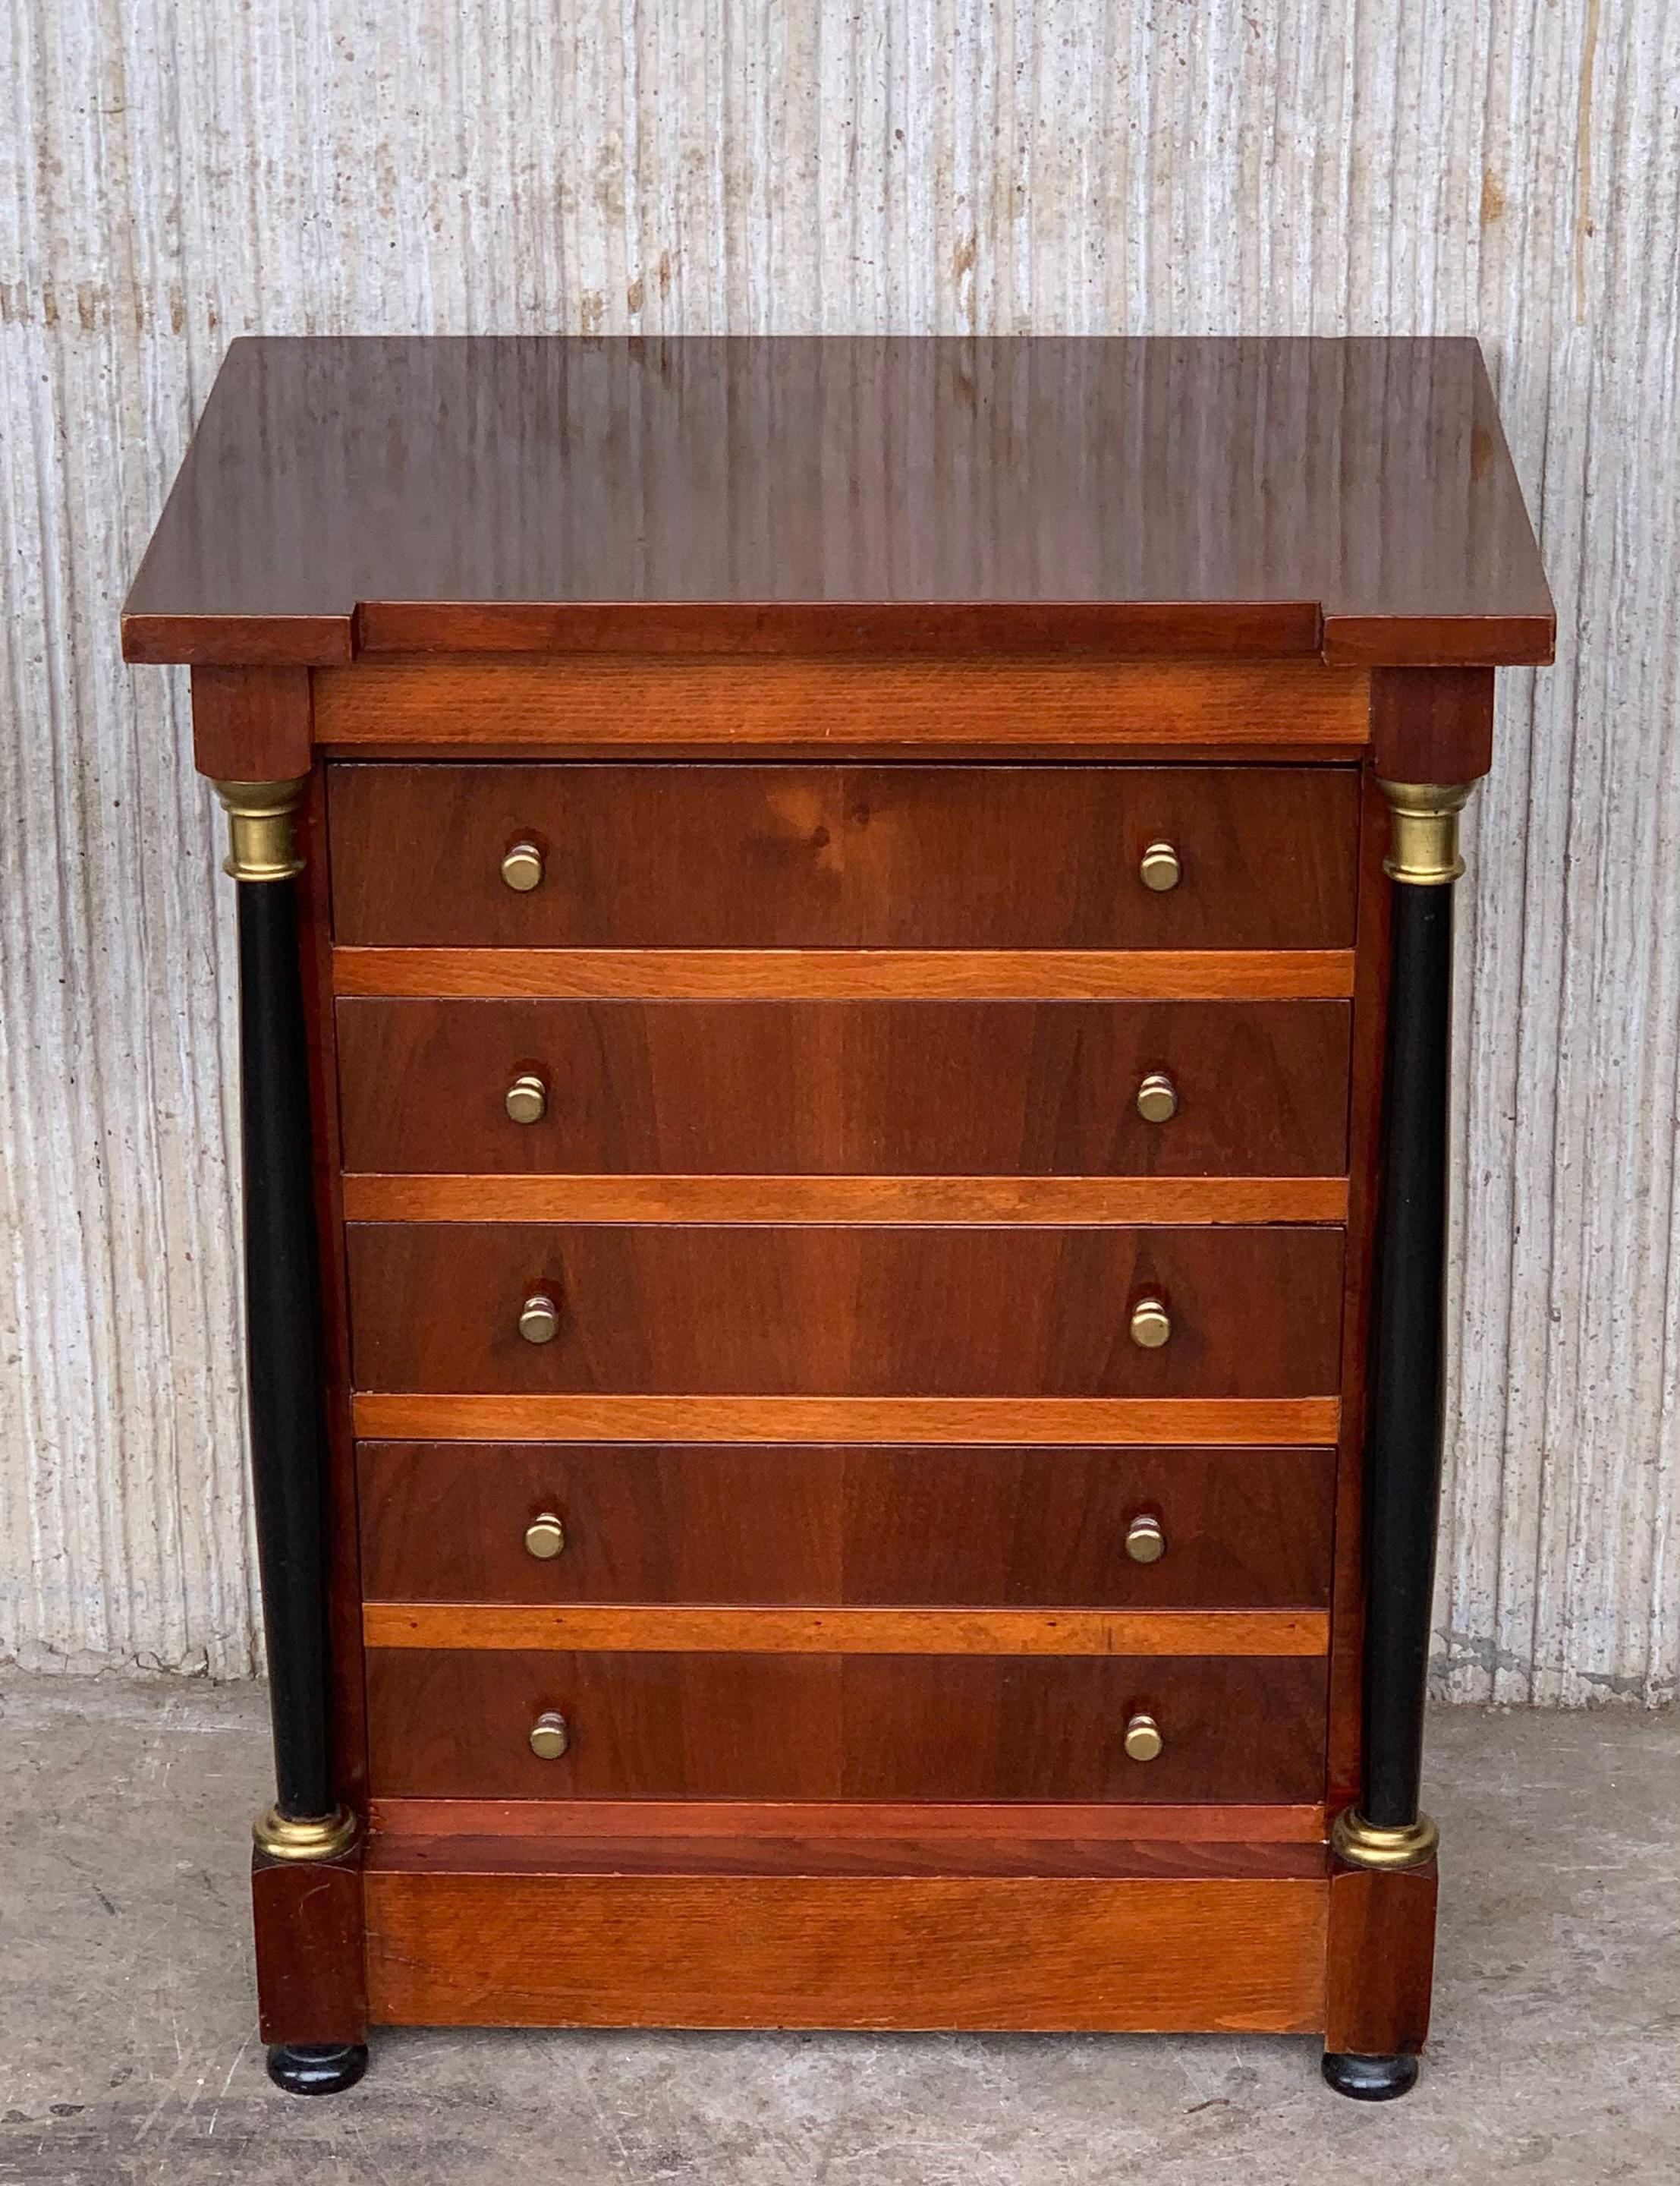 19th century French Louis XVI black mahogany nightstands or side table with four drawers and ebonite columns in the sides.
The tables have two hidden trays in both sides for more uses.